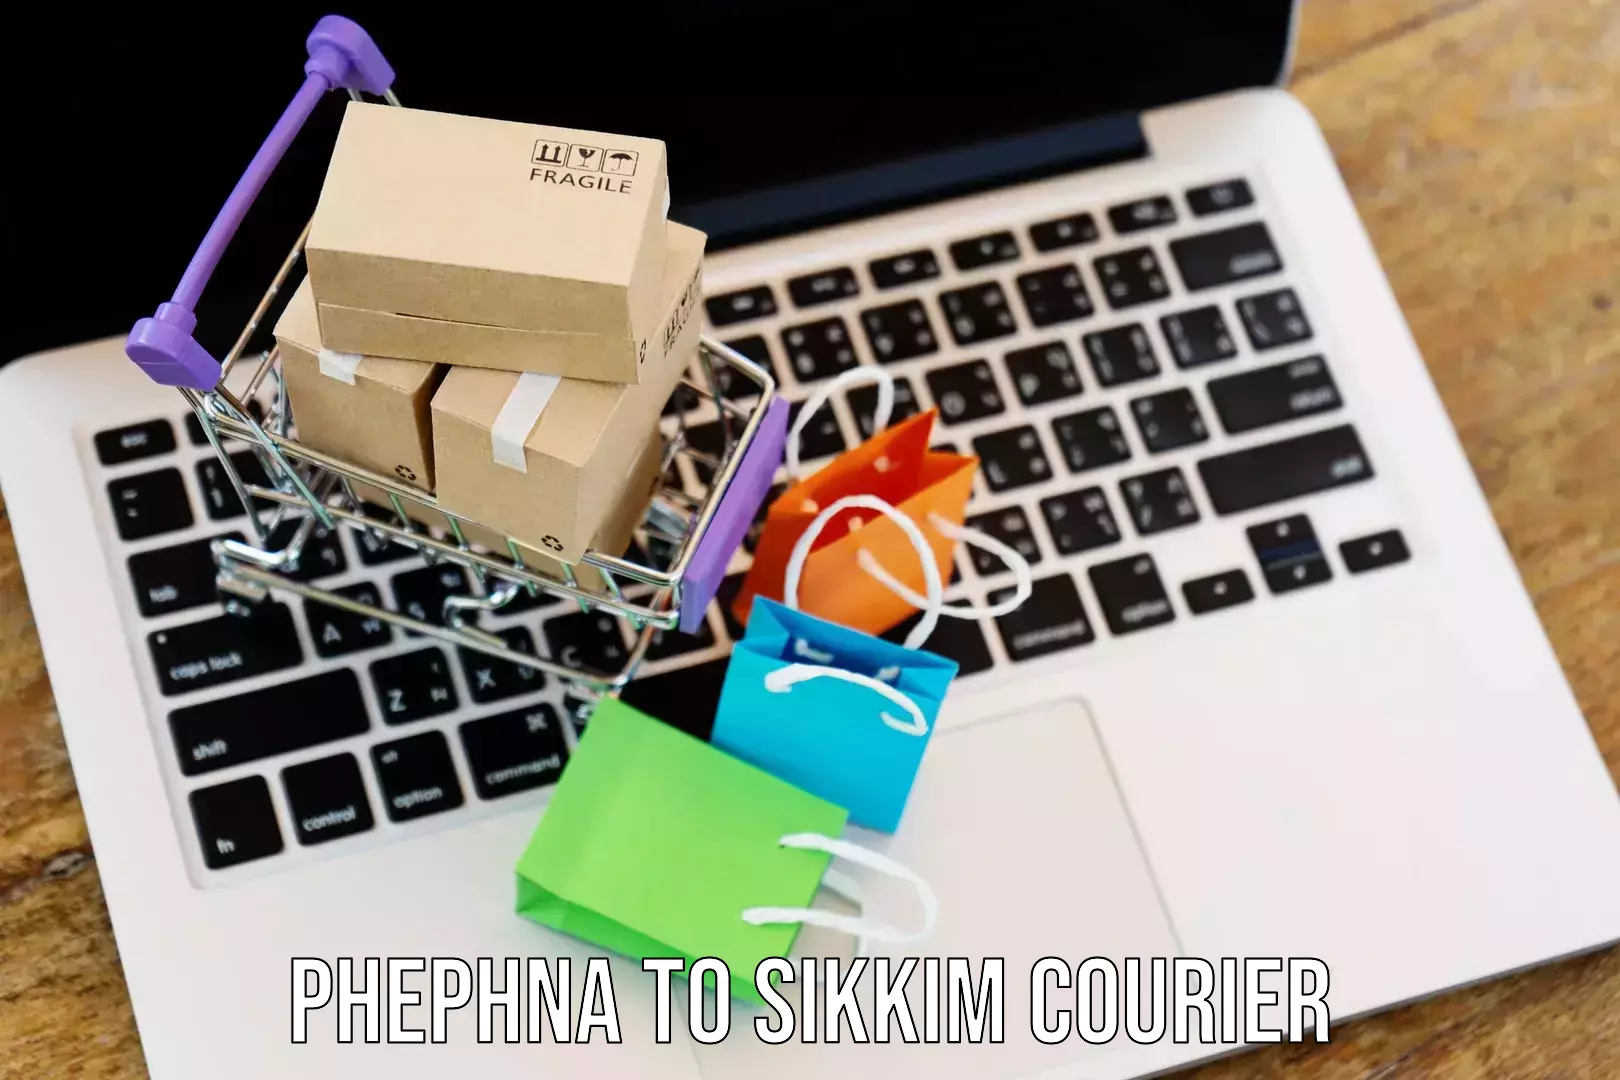 Personalized courier experiences Phephna to Sikkim